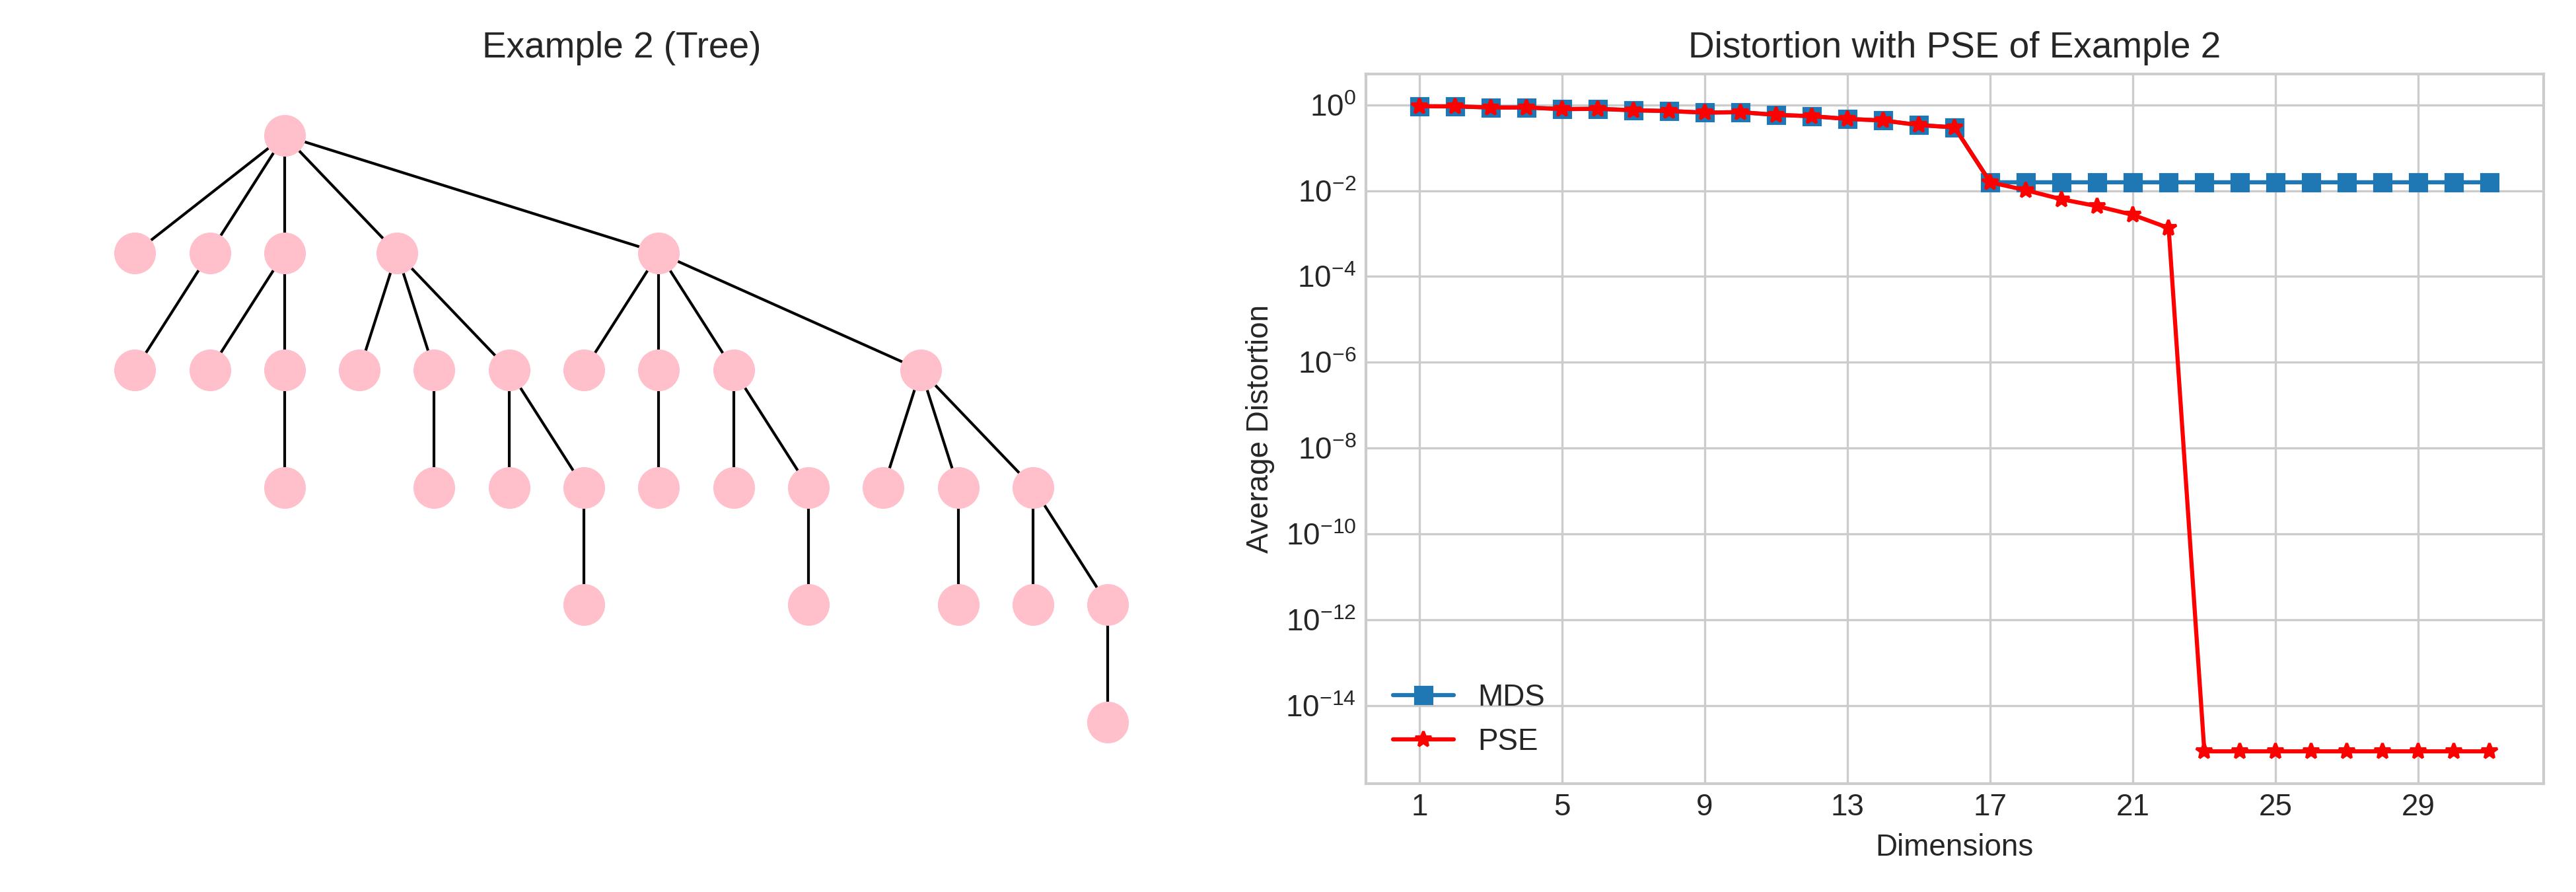  Examples of metric spaces and their embeddings using MDS and PSE \label{fig:pse-examples} 